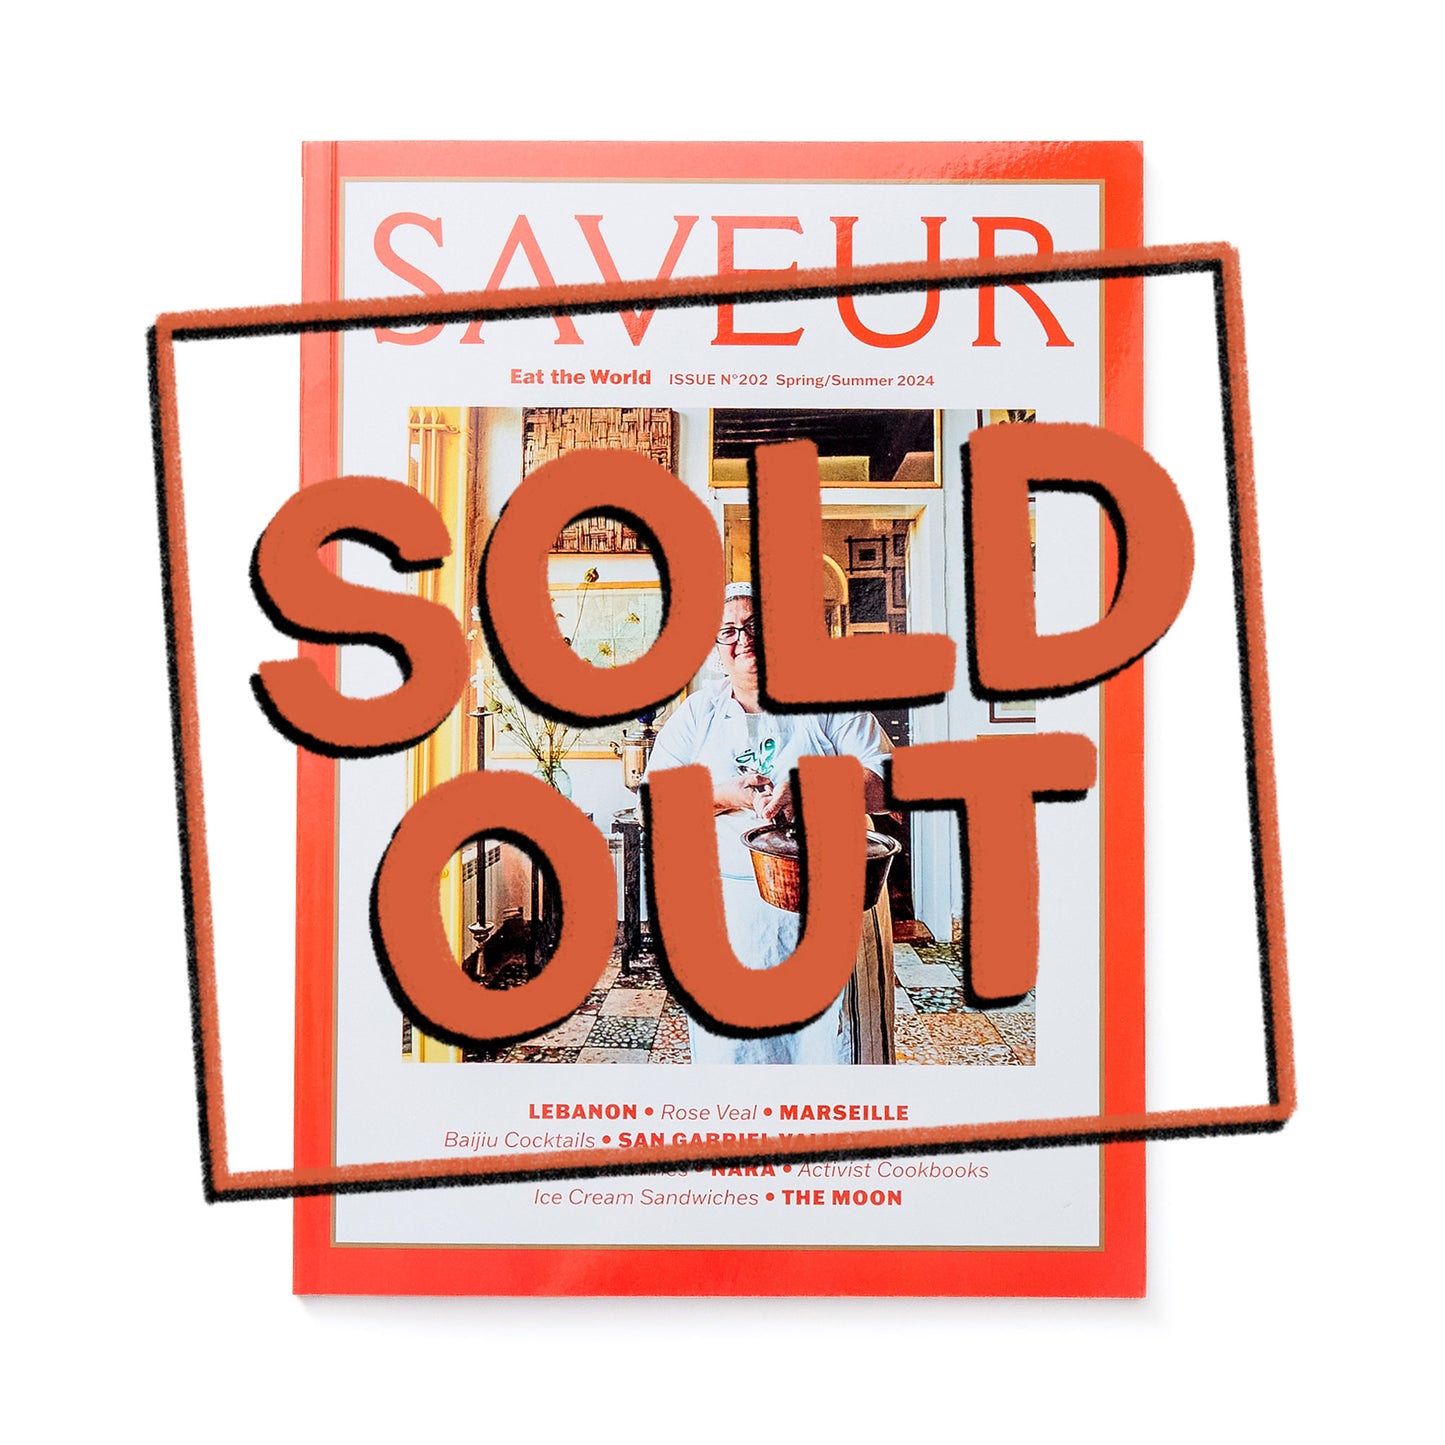 SOLD OUT: SAVEUR magazine issue No. 202; Spring/Summer 2024